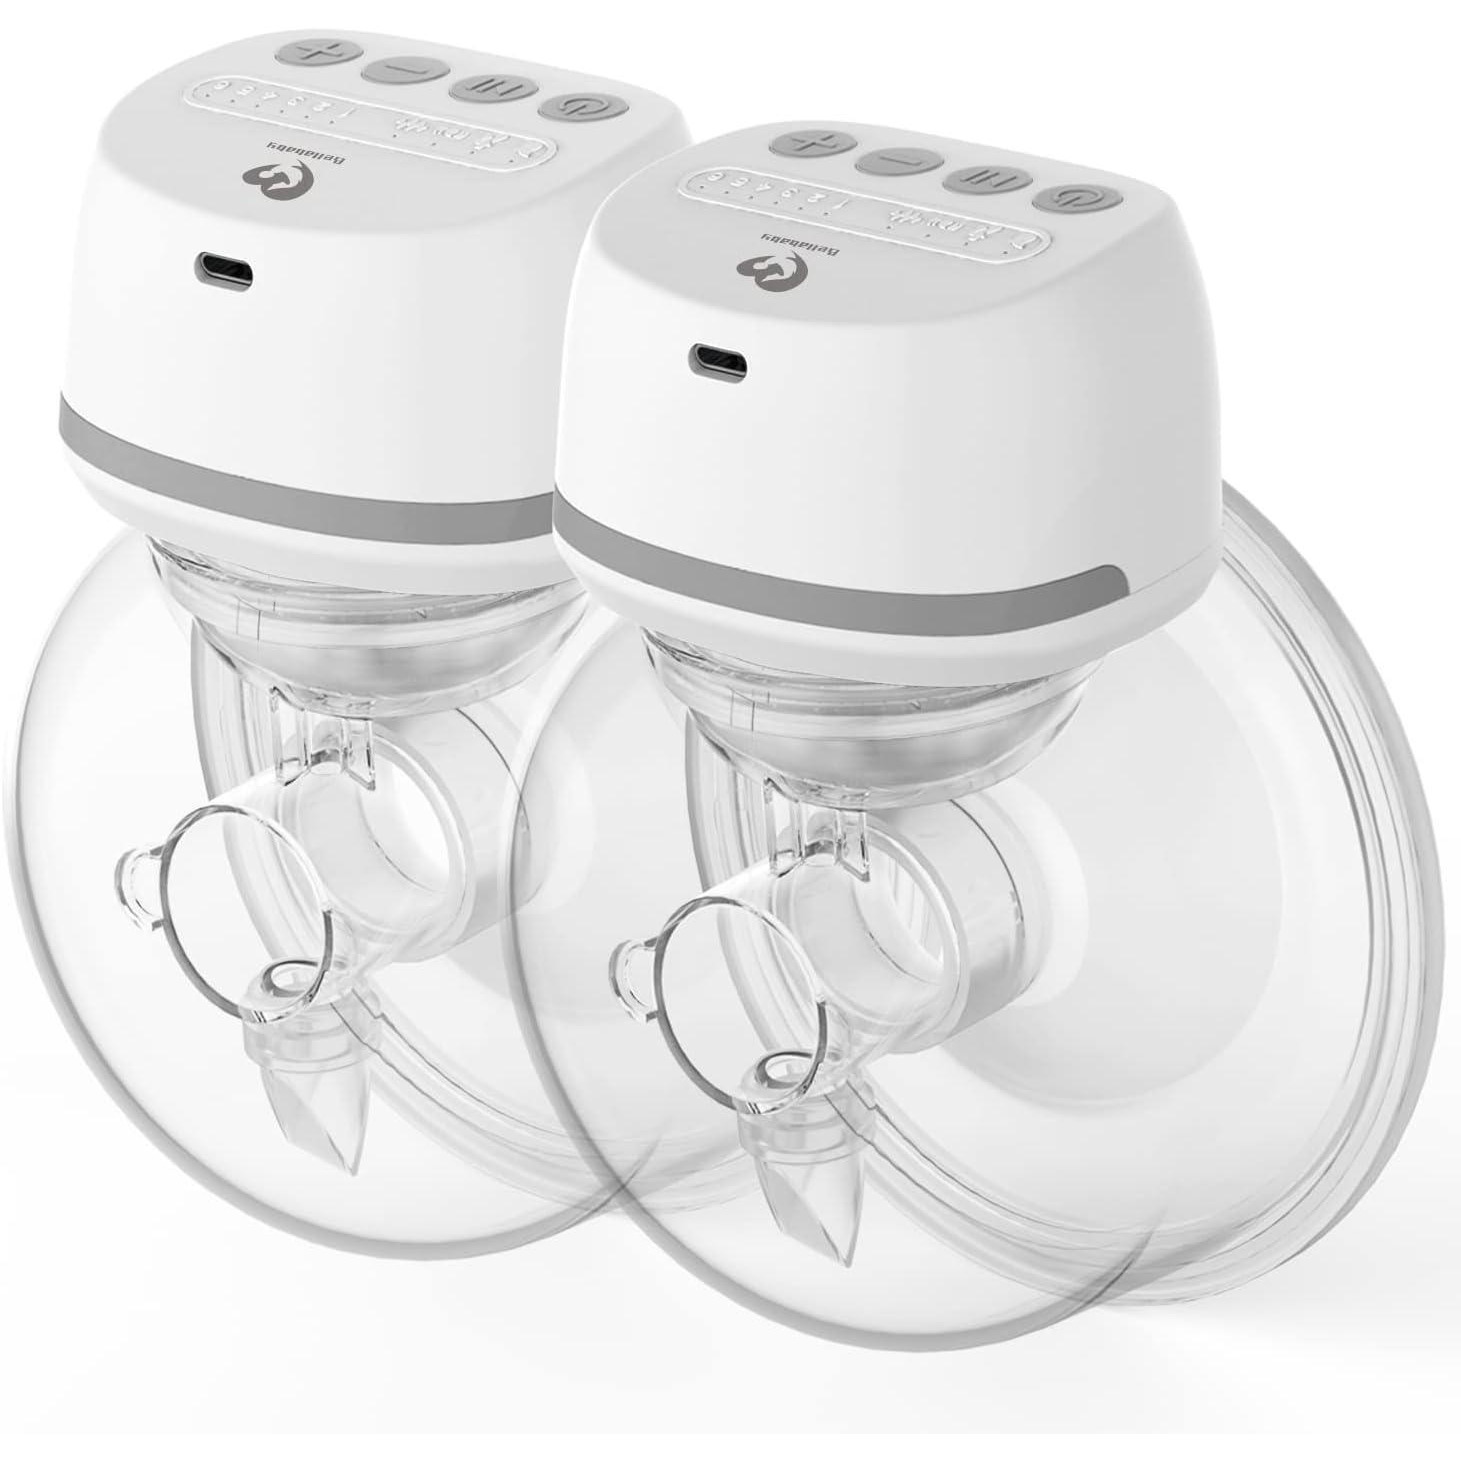 Bellababy Wearable Breast Pumps Hands Free Low Noise 2PCS - Open Box